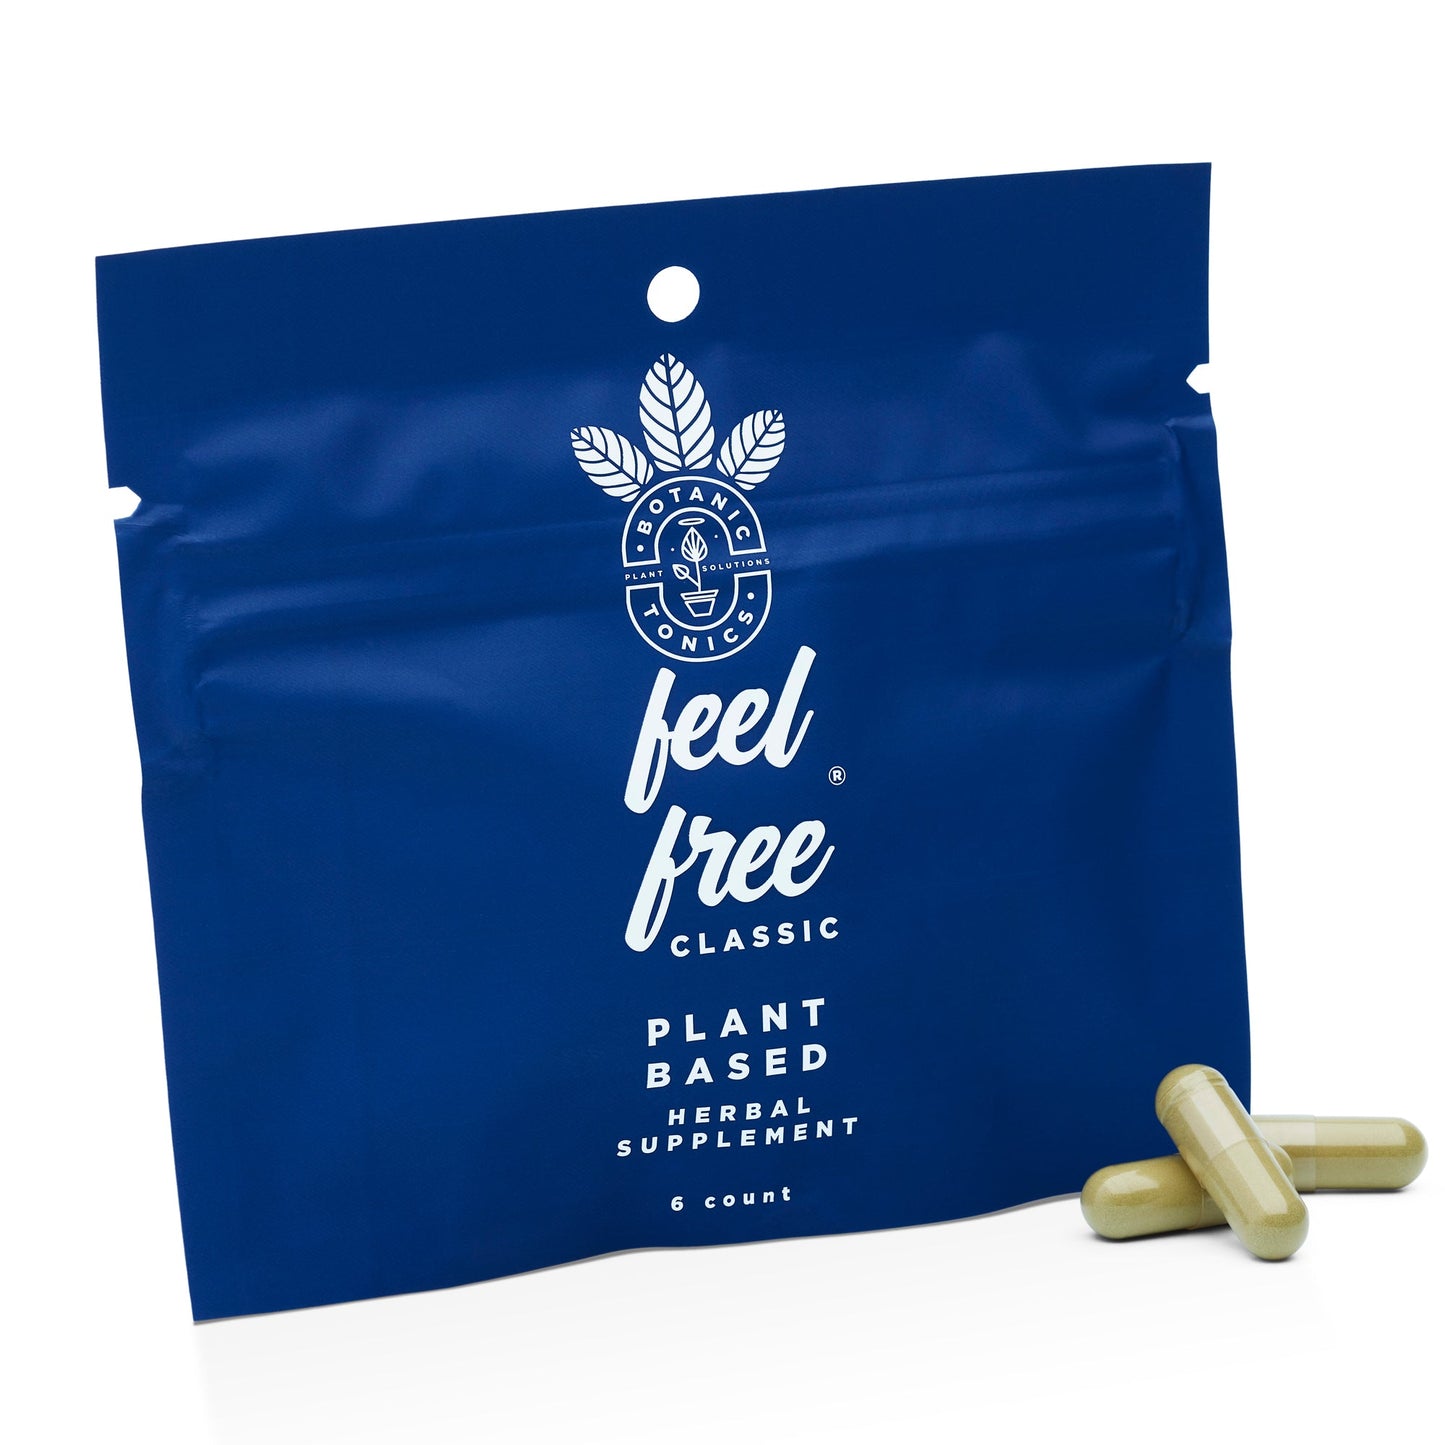 feel free CLASSIC capsules - 12 ct pouch case